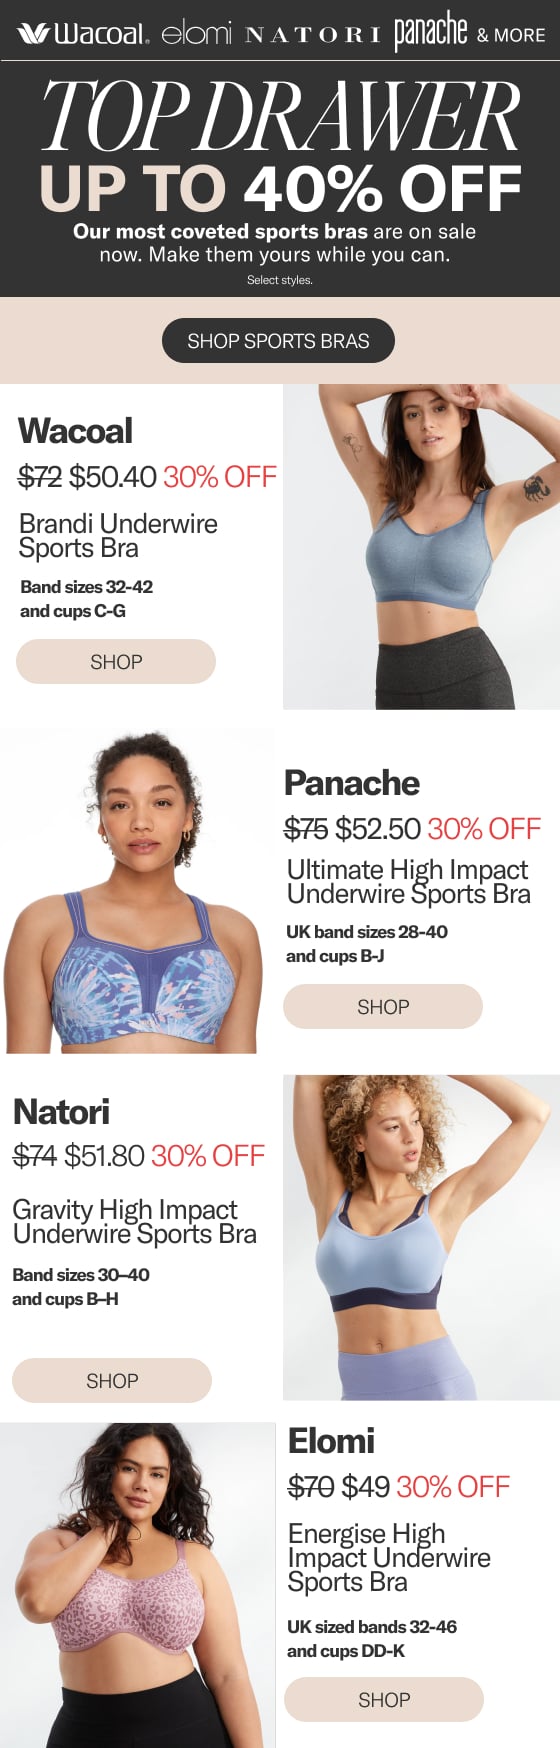 Up To 40% Off Sports Bras  Top Drawer Event - Bare Necessities